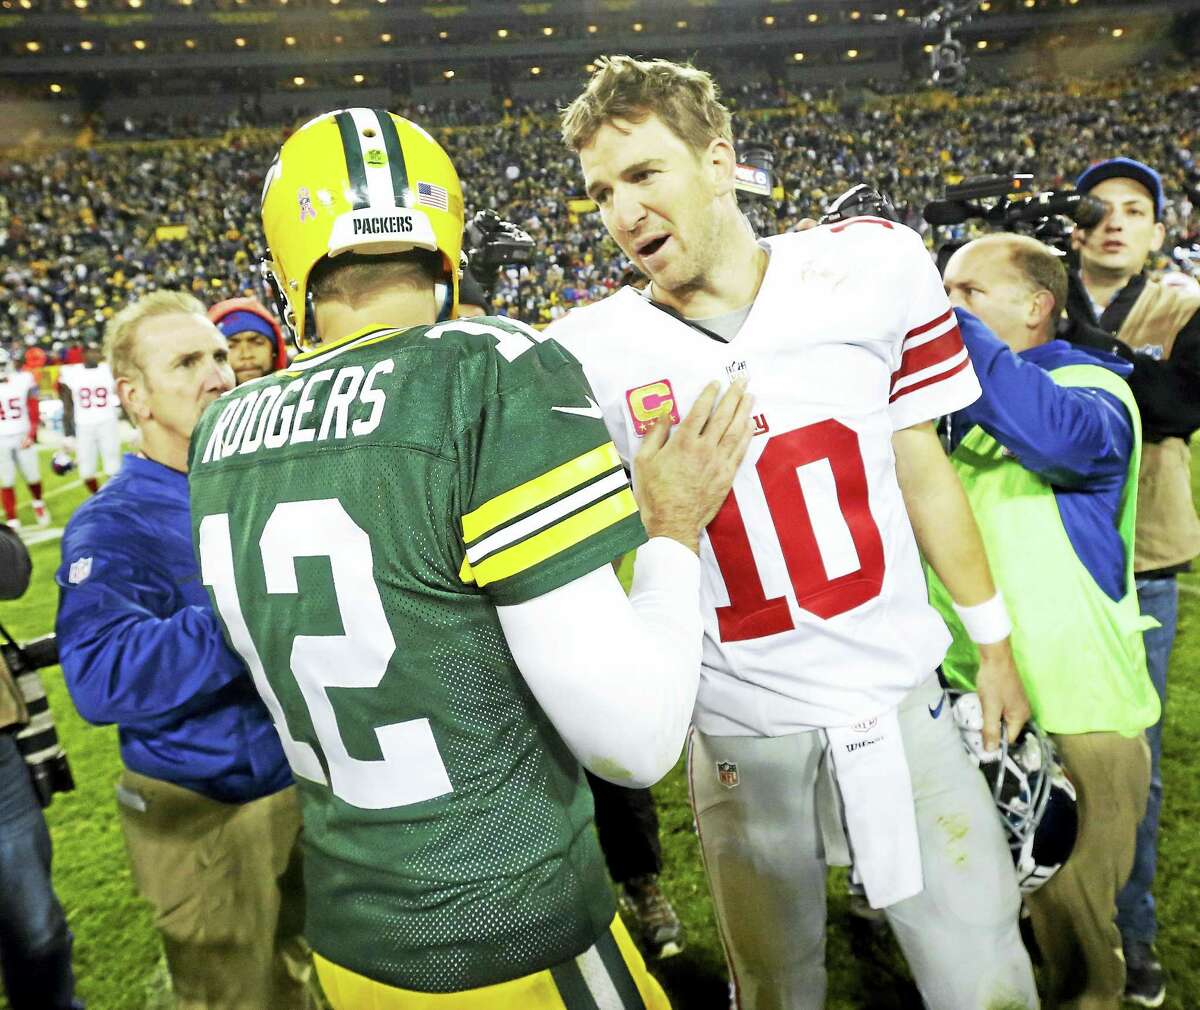 The Packers’ Aaron Rodgers talks to Giants quarterback Eli Manning after a game earlier this season.